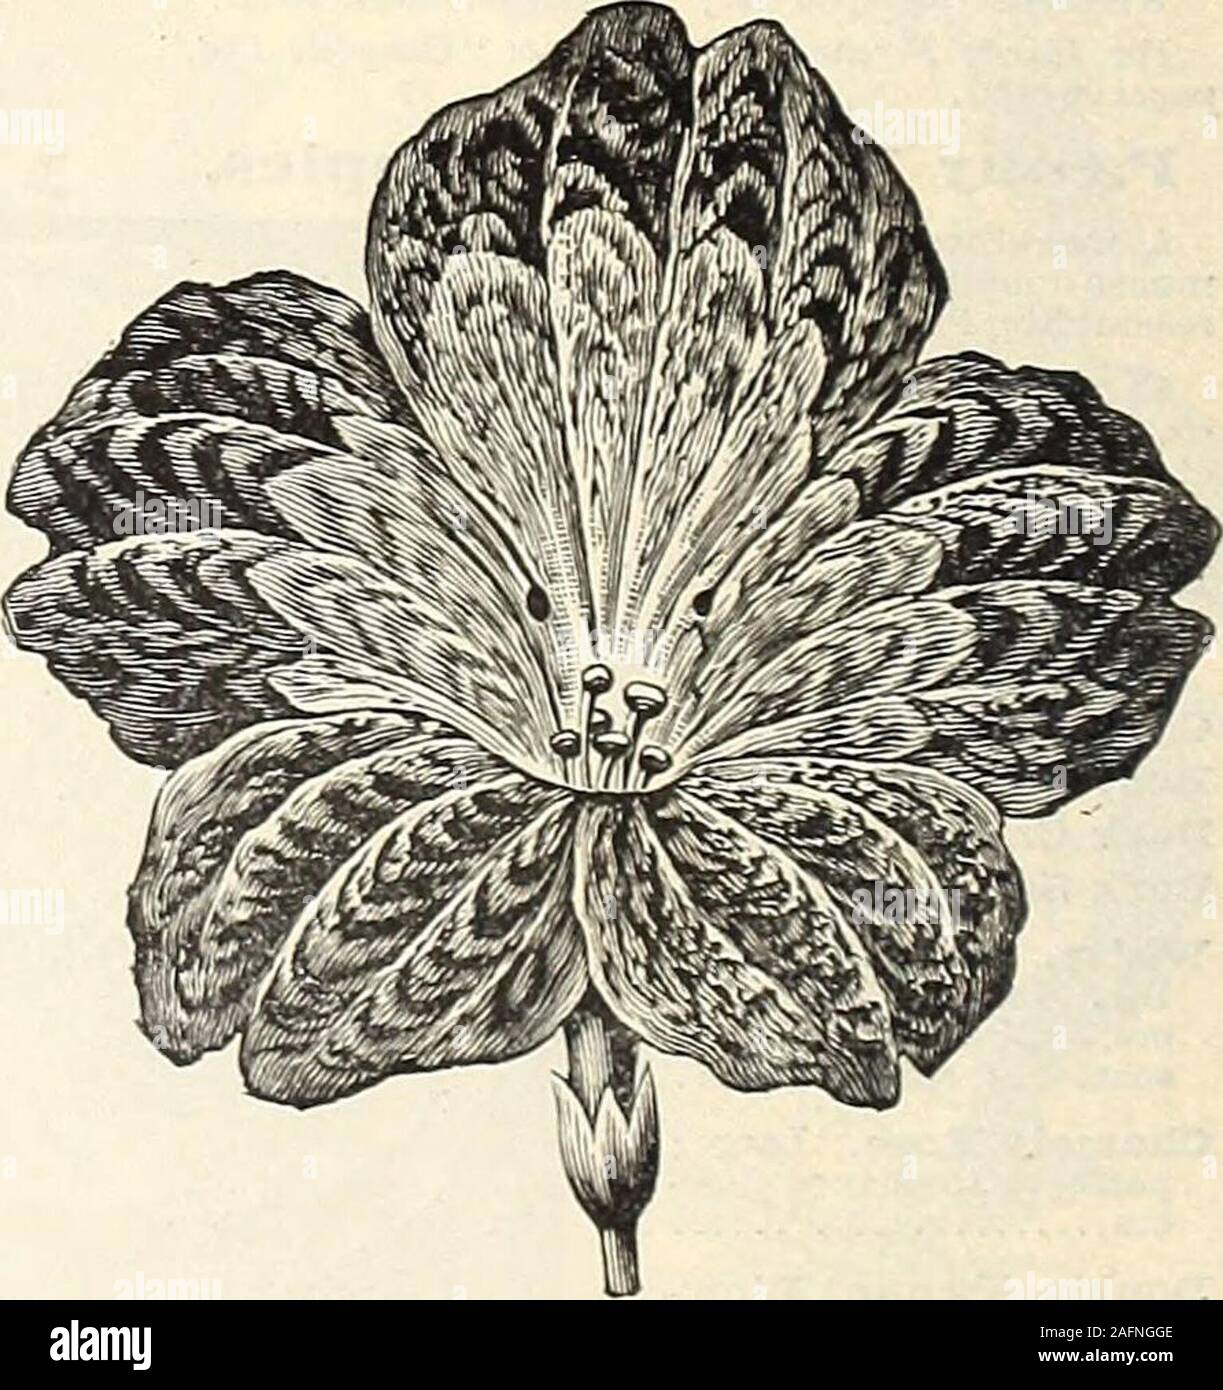 . Manual of everything for the garden : 1894. ty, snow-white flowers; very profuse 36&gt; Other GreenhousePrimroses. Obconica. Flowers pale lilac, borne inumbels on long stems; delicately fragrant;in pots it will flower continuously for thegreater portion of the year; plant dwarfand compact, 6 to 12 inches high Pkt. 16&gt; Floribunda. Foliage deep green, stems ofboth leaves and flowers red, making acharming contrast to the whorls of brightyellow flower3 borne during the autumn and winter months 2© For Hardy Primulas, see Complete List,pages 90 to 97. CHINESE PBI1IBOSE. SALPIGLOSSIS. (Painted T Stock Photo